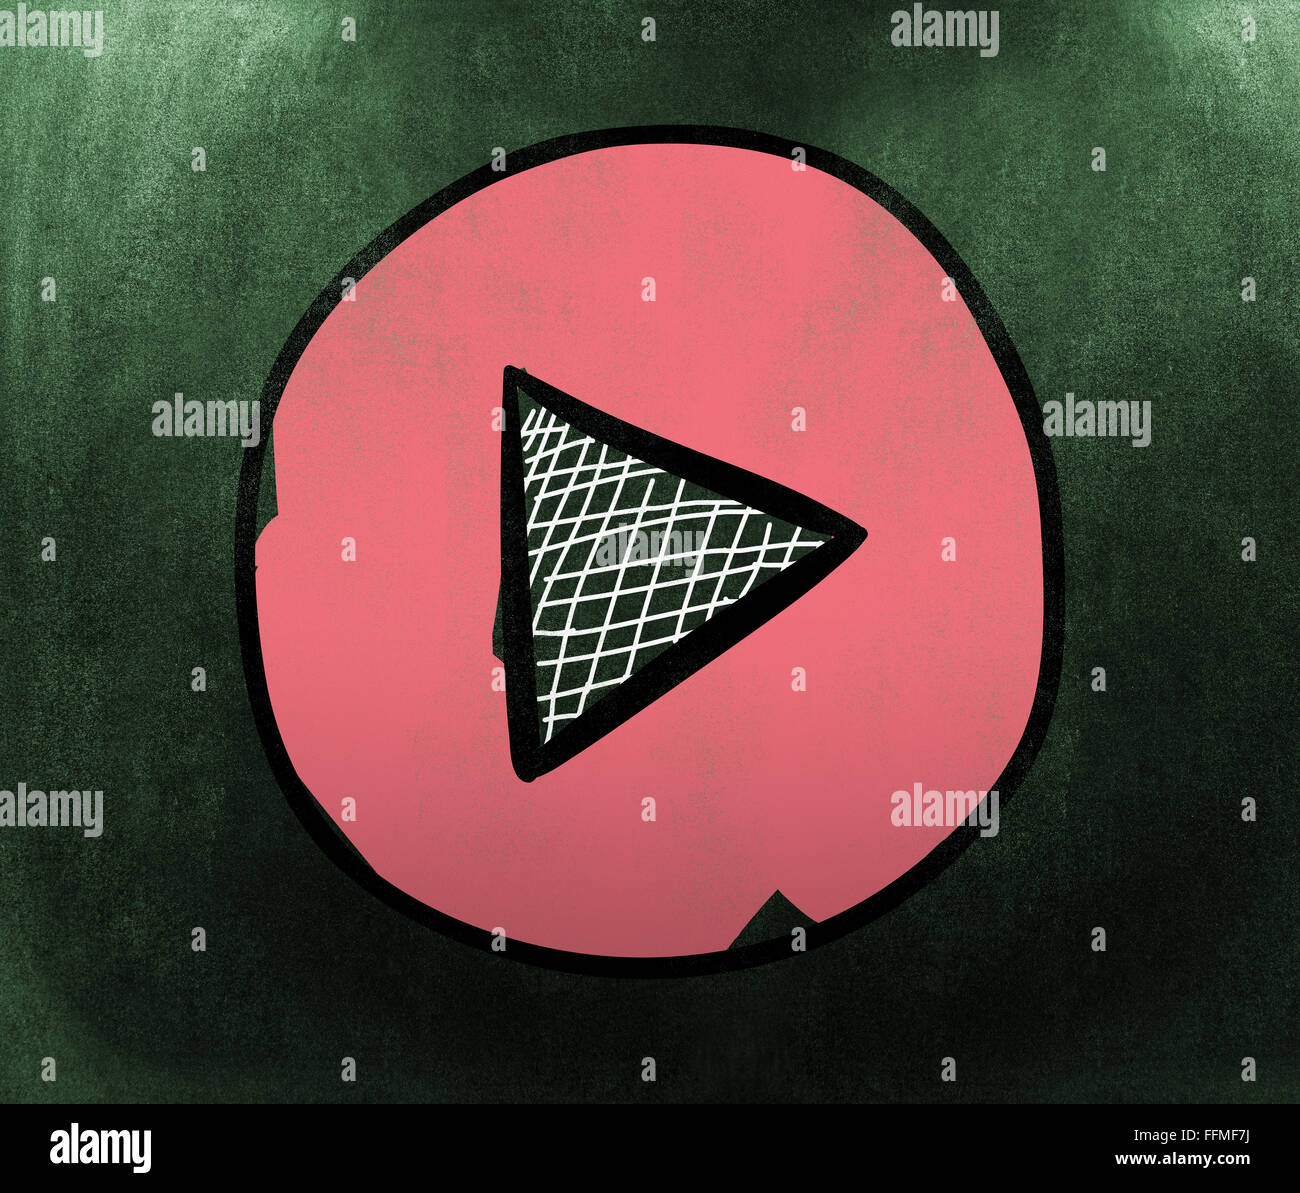 Composite image of illustration of a play button Stock Photo